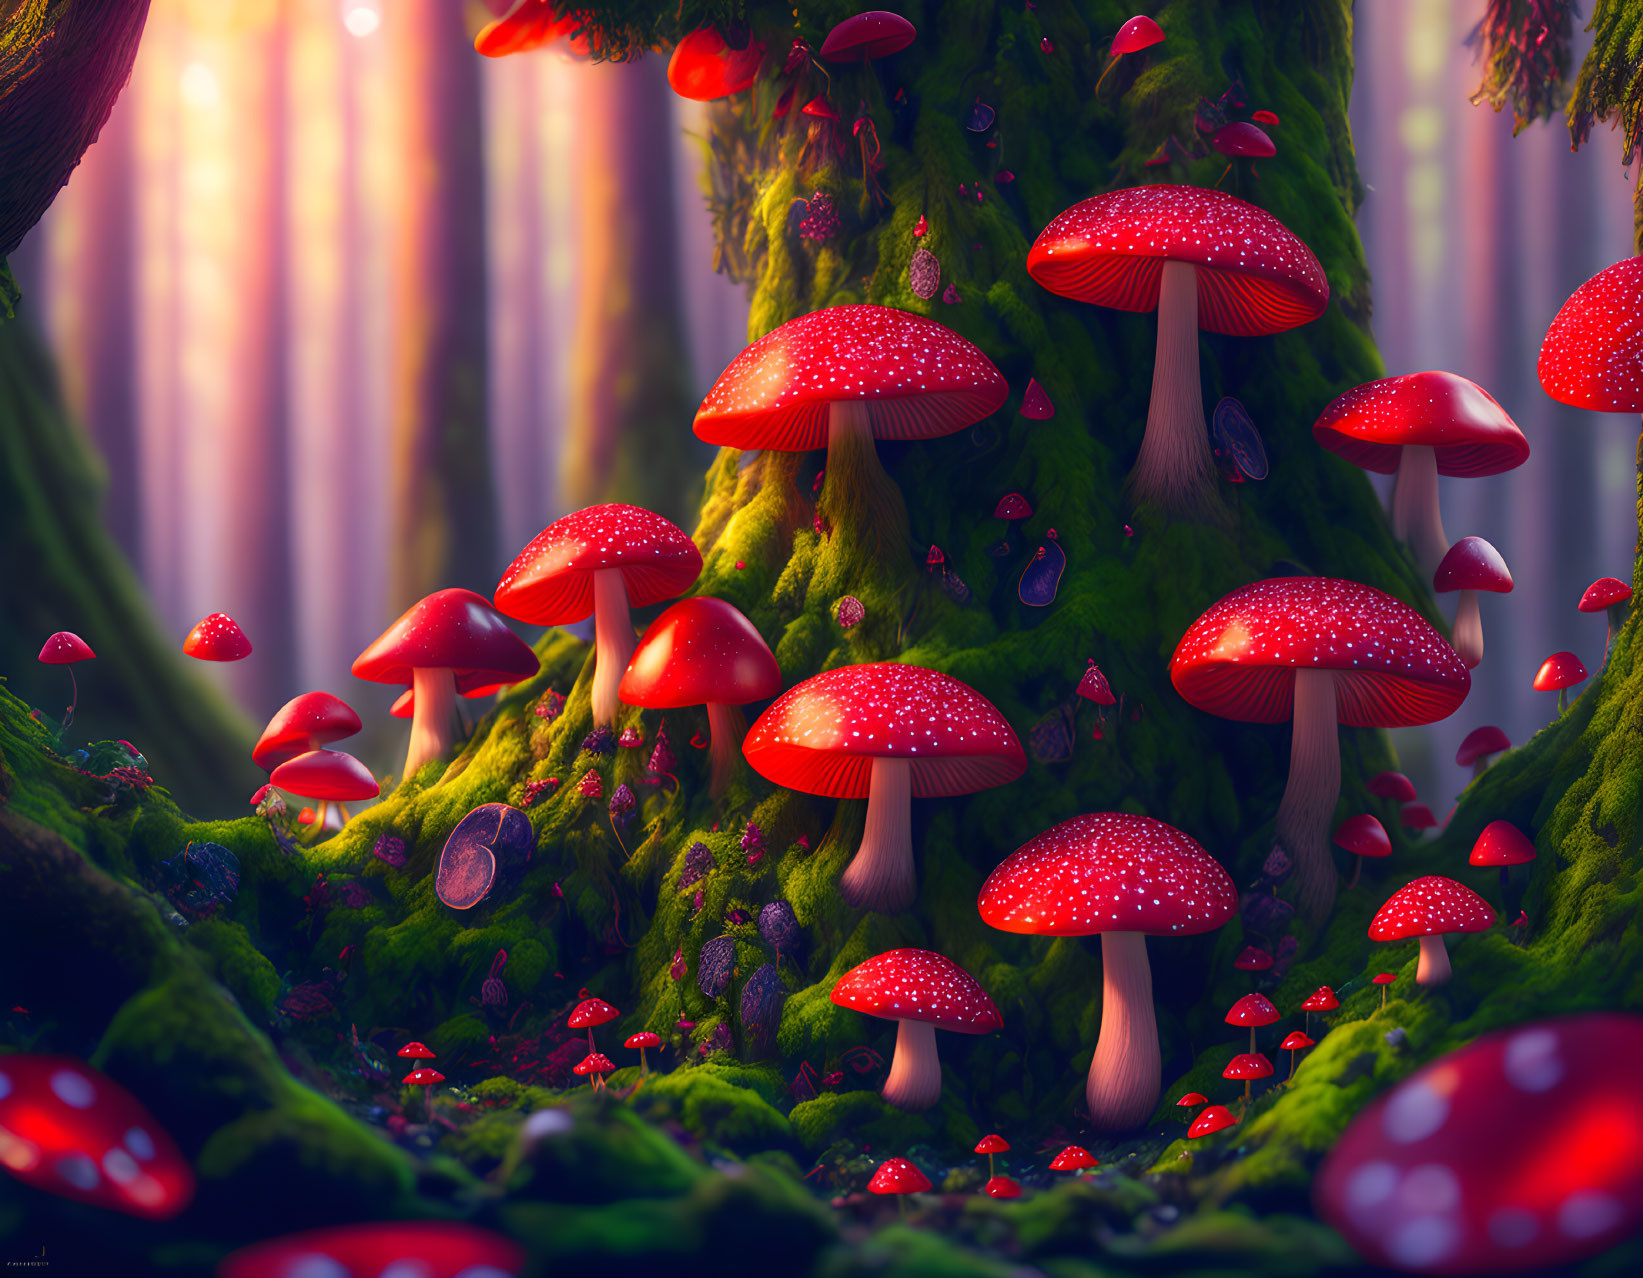 Colorful digital artwork: Mystical forest with red mushrooms and lush greenery